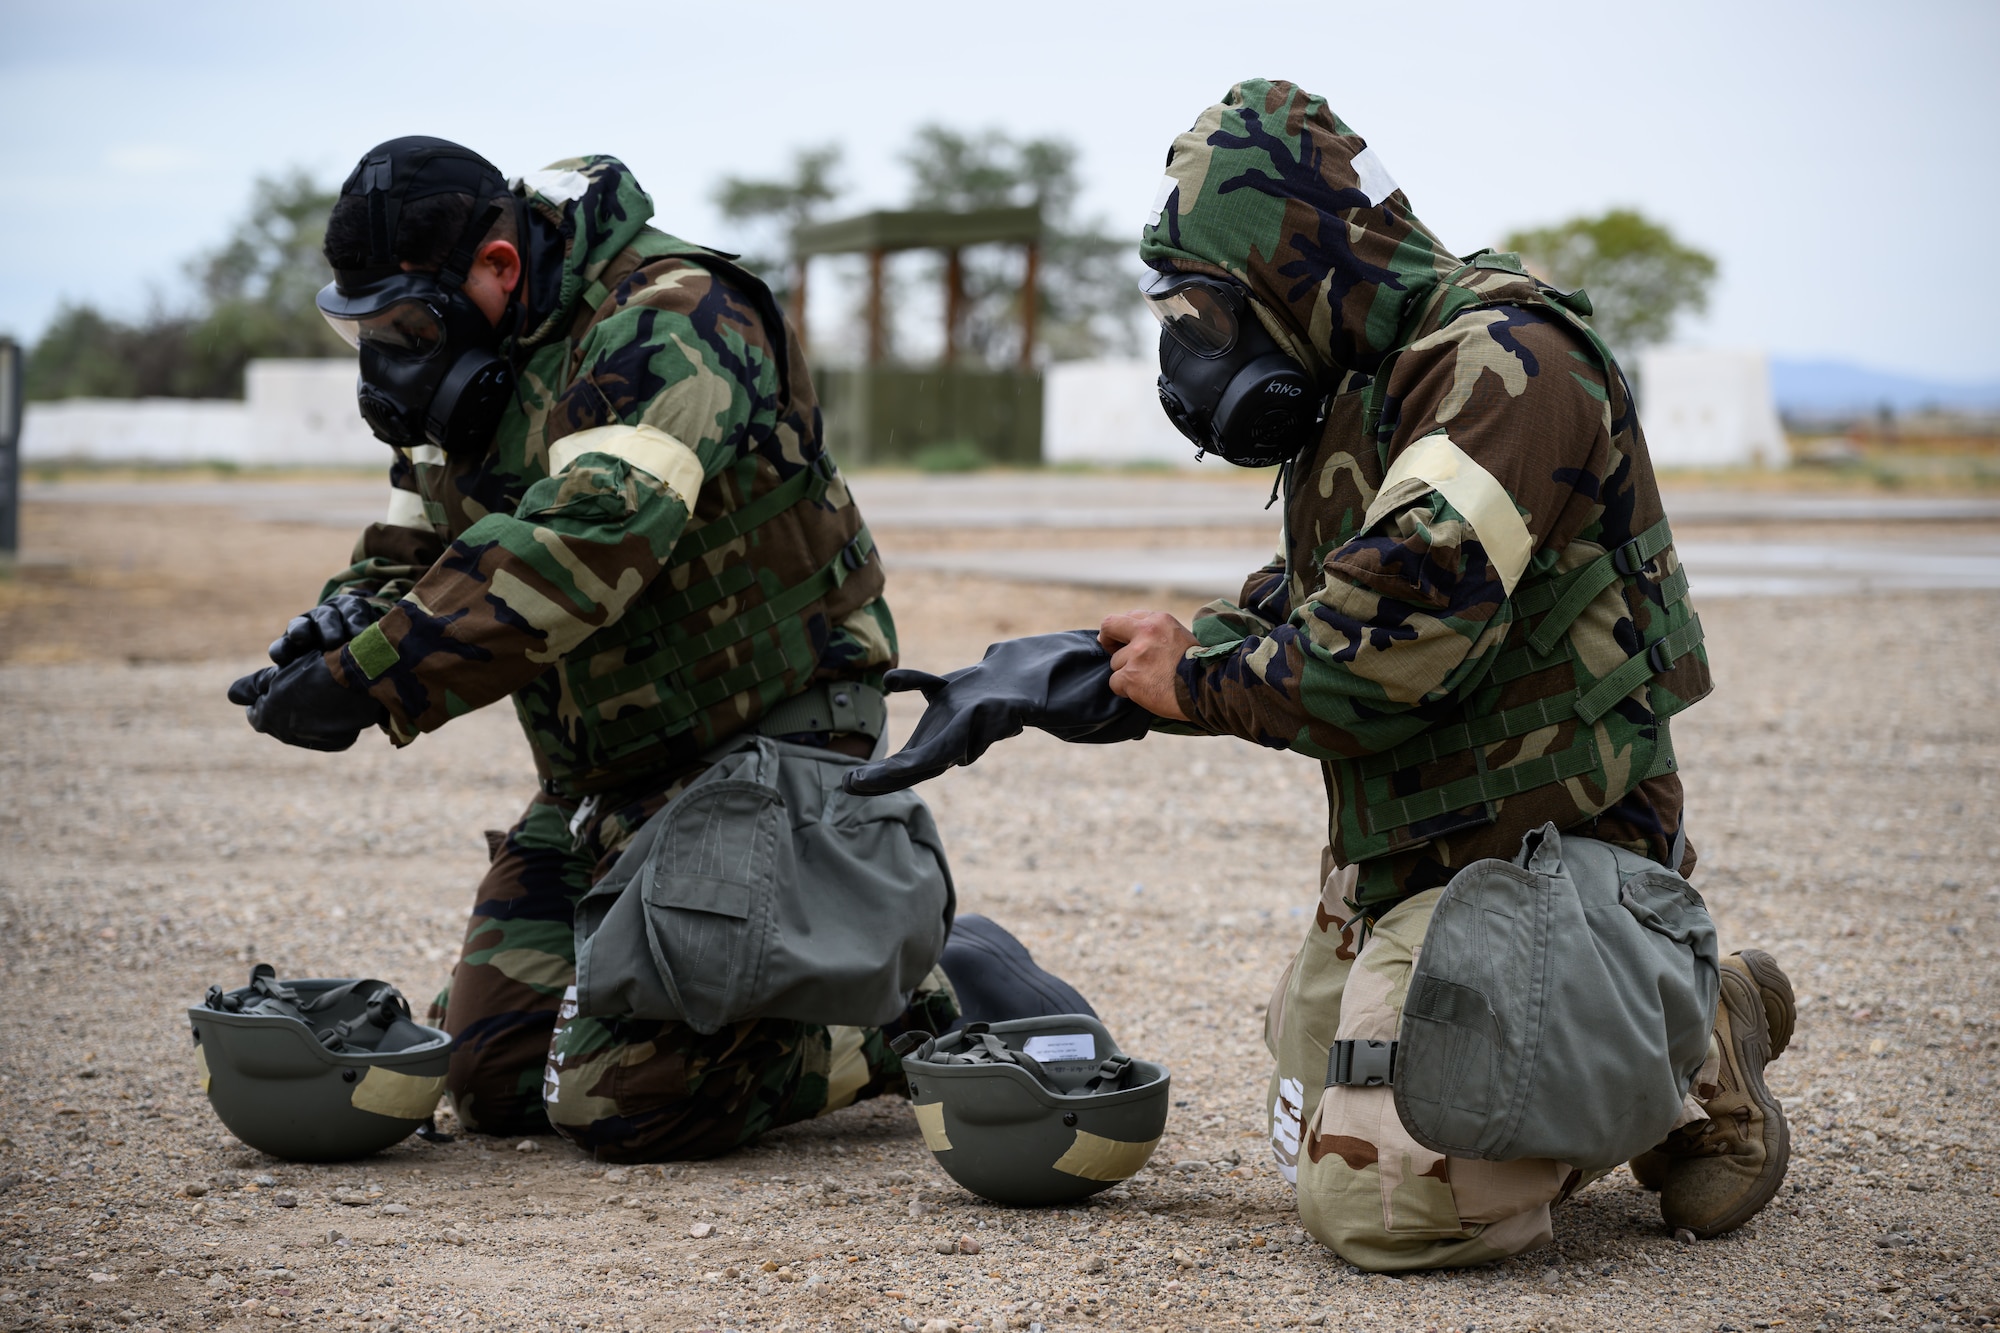 Airmen don protective gear during an Ability to Survive and Operate rodeo (ATSO) exercise at Hill Air Force Base, Utah, Sept. 13, 2020.